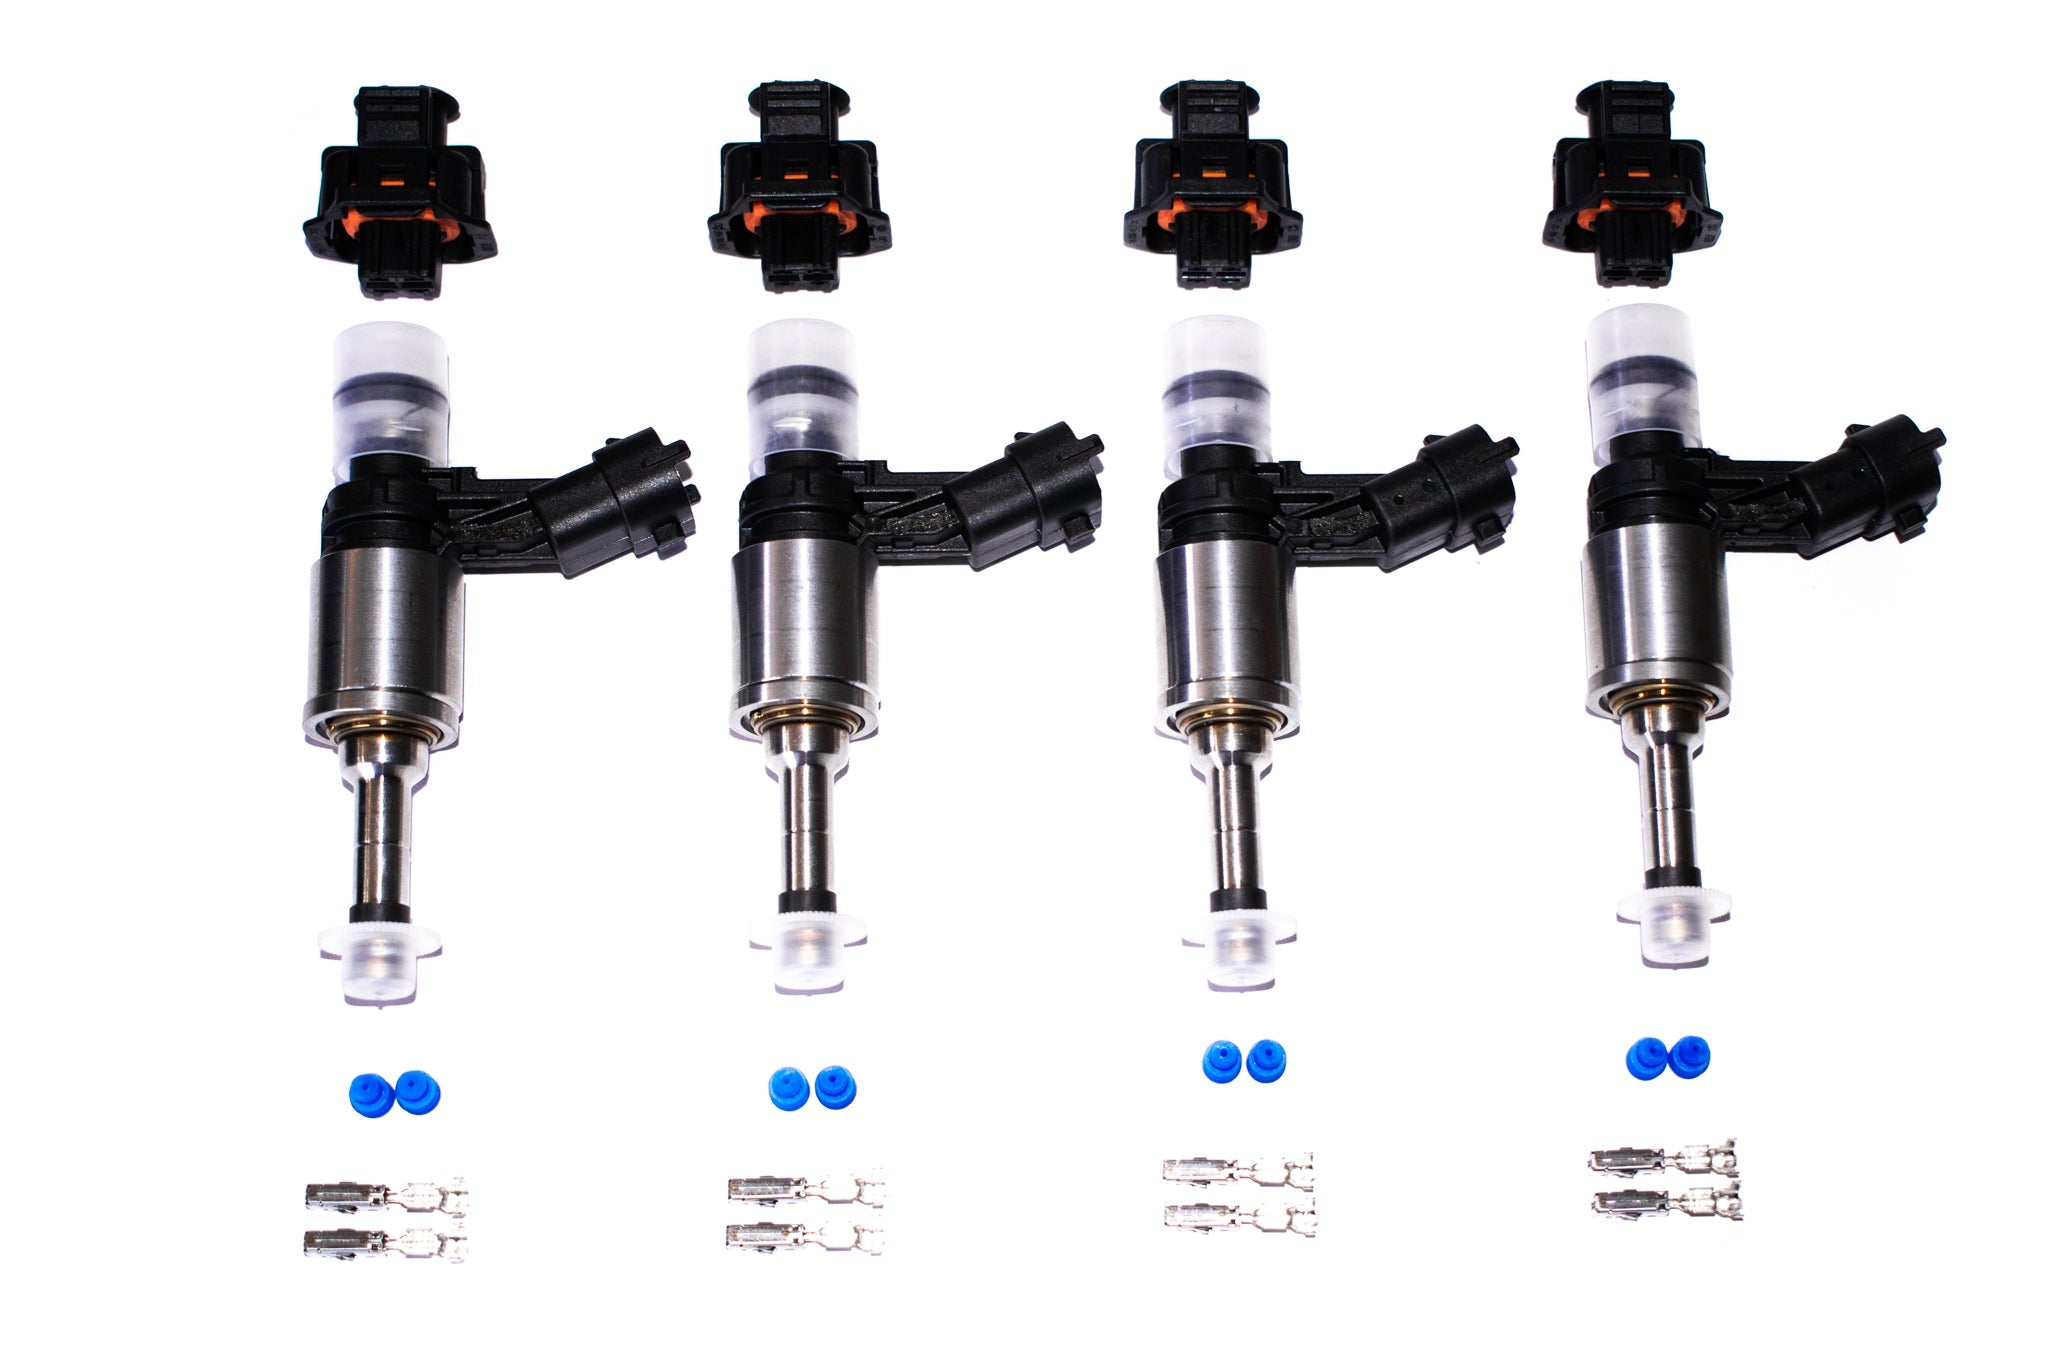 1.8 / 2.0 TSI - TFSI Injectors for up to 600 hp - RTMG Performance